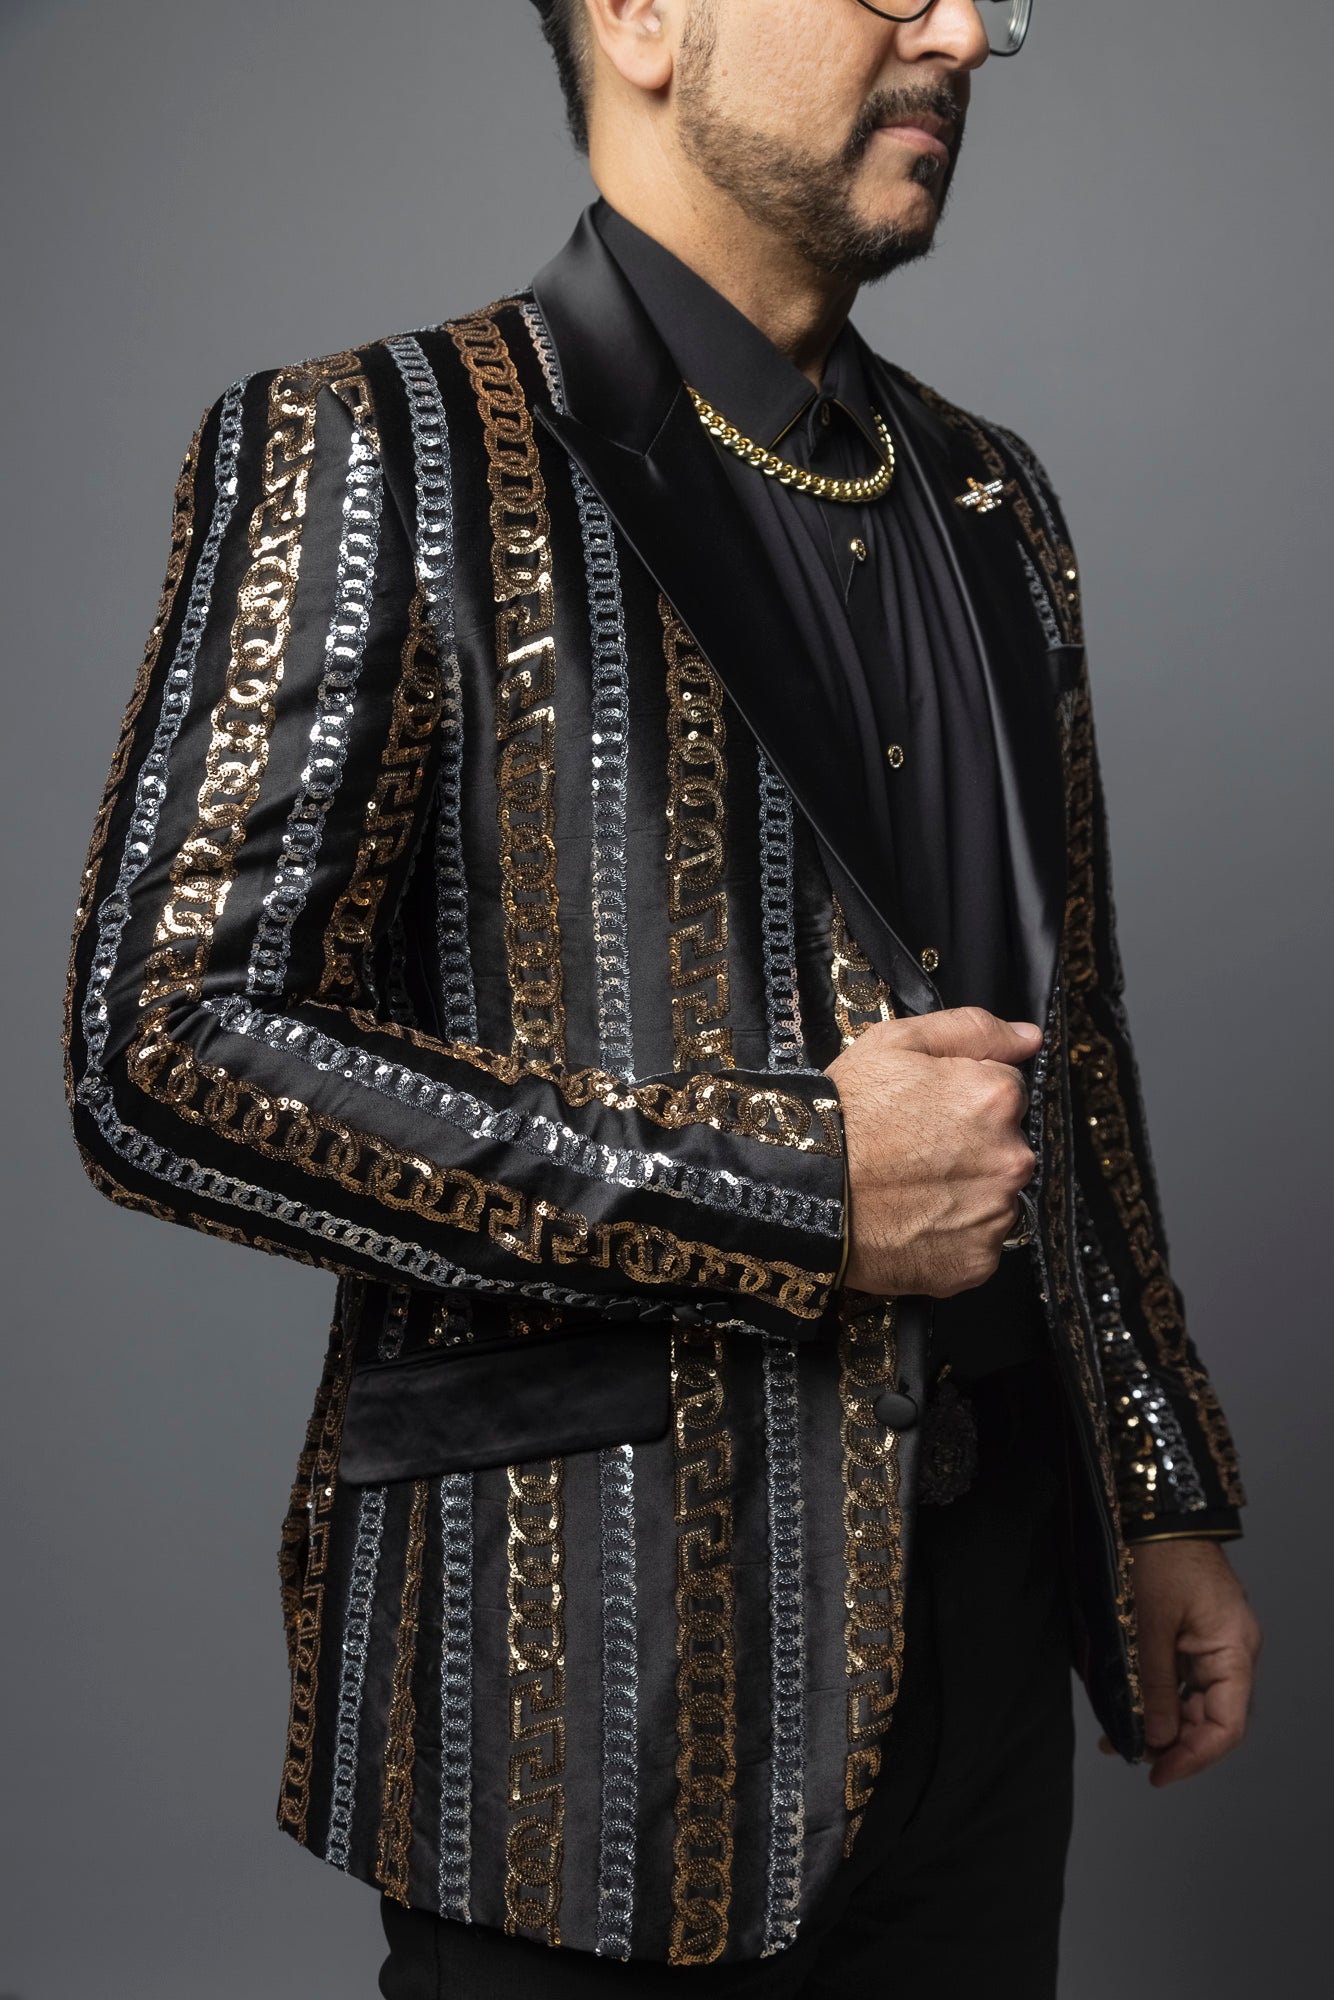 designer blazer featuring a two-button closure and eye-catching sequin detailing in gold and silver.